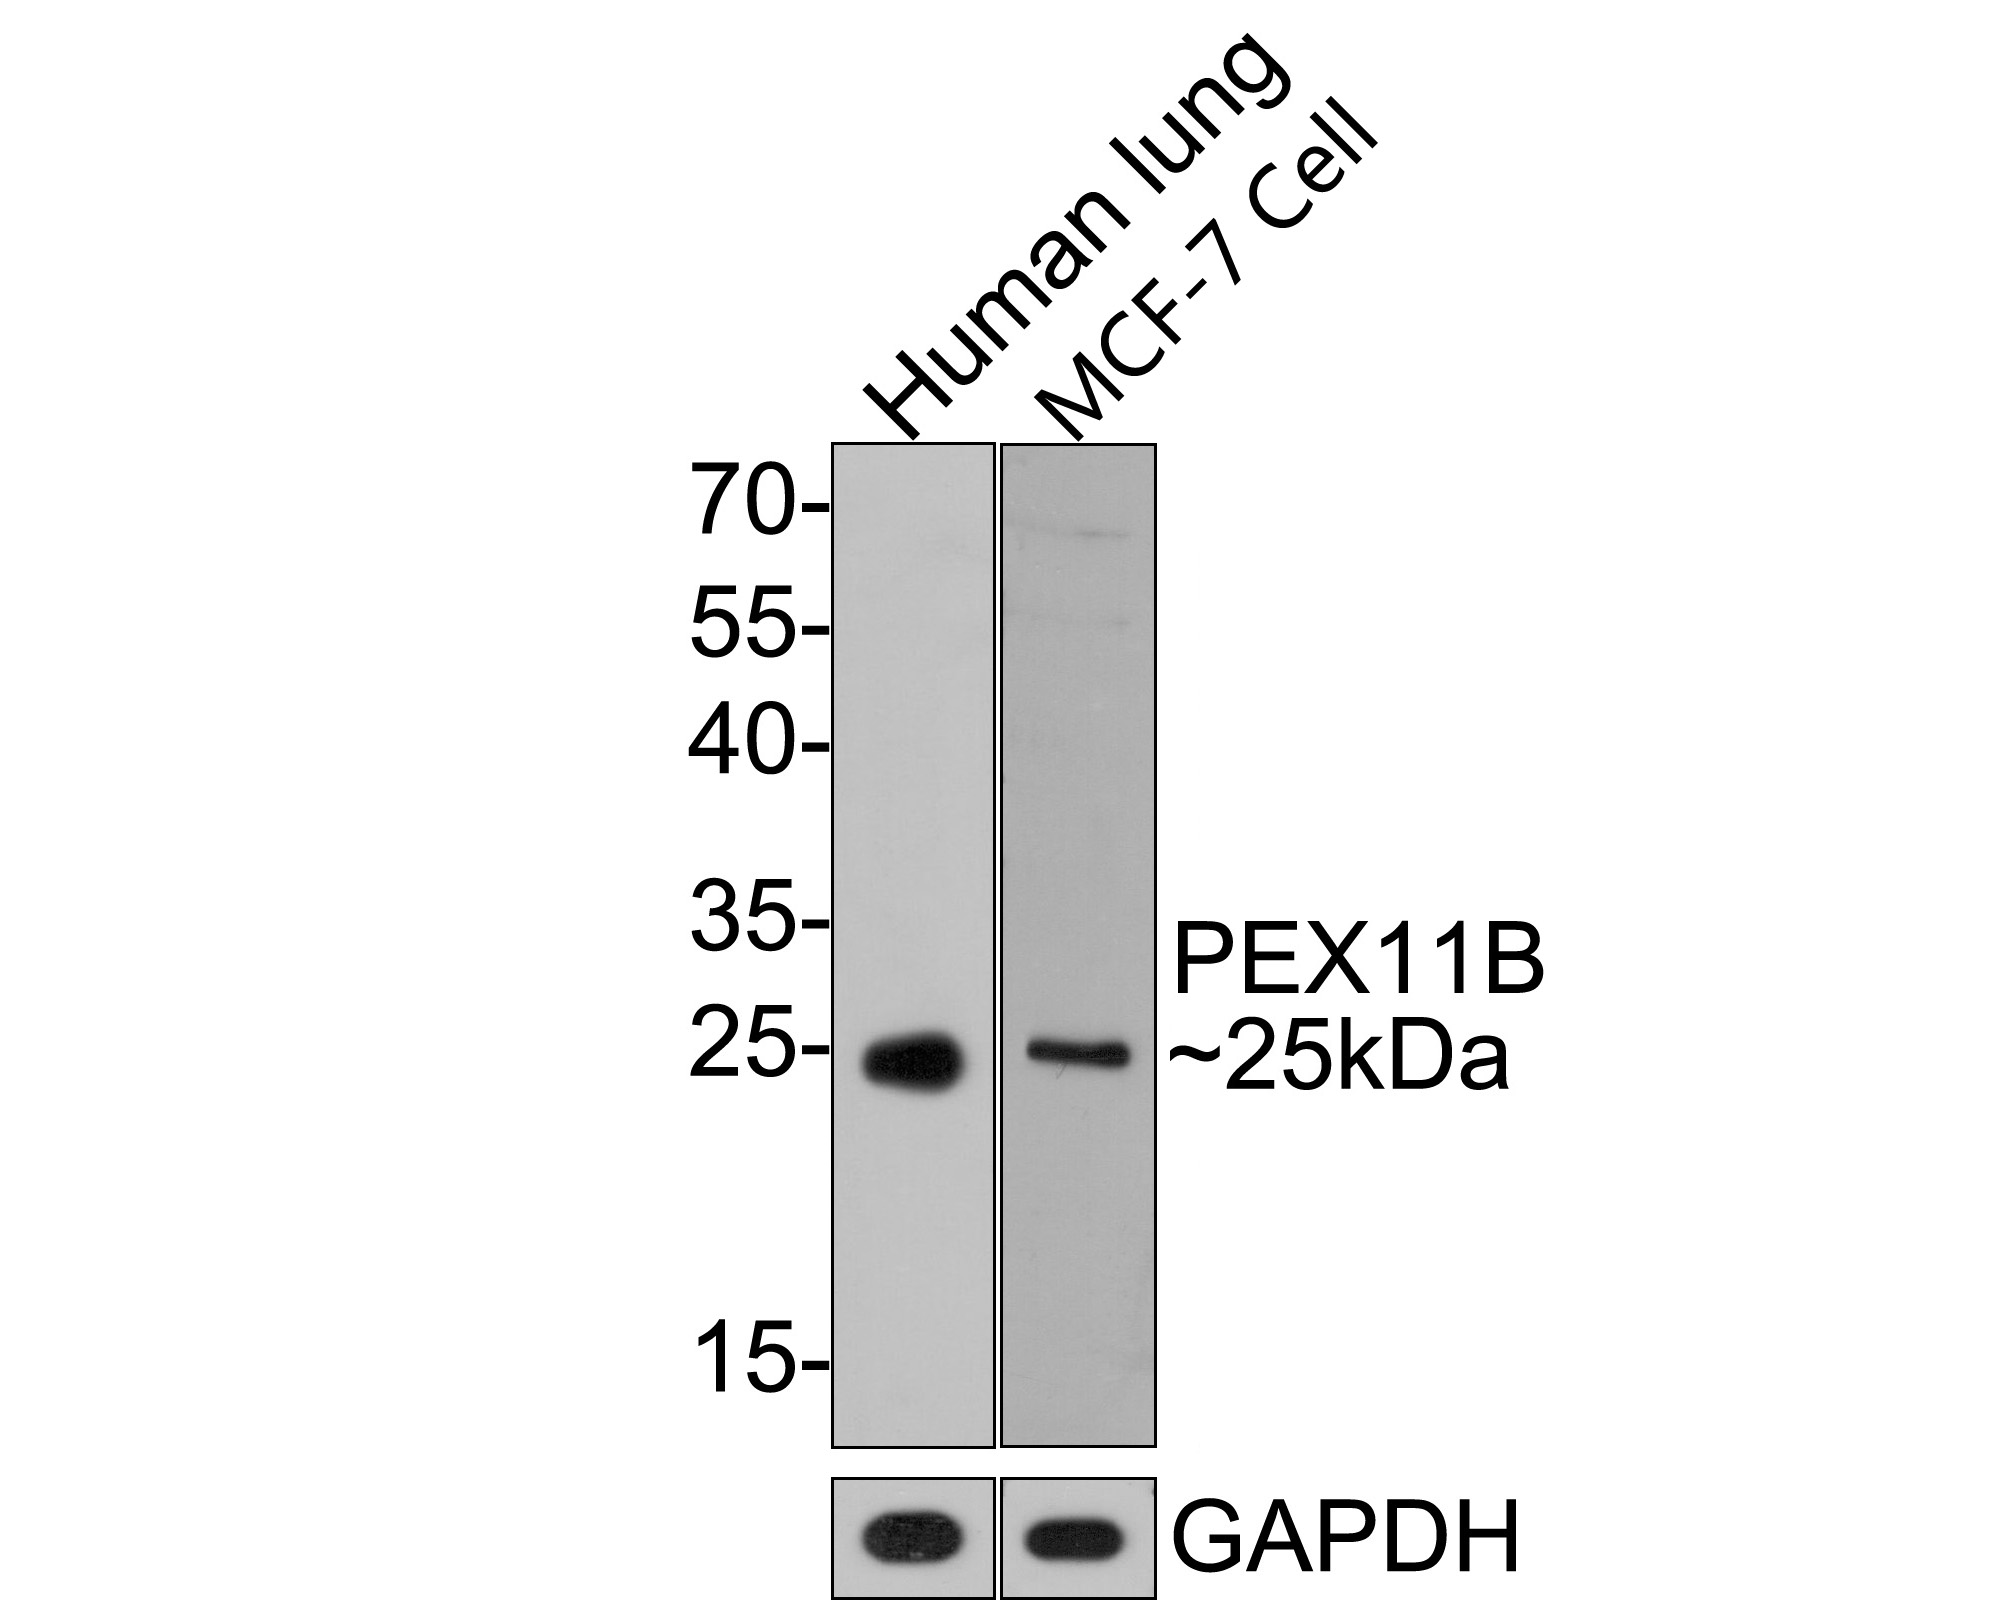 Western blot analysis of PEX11B on different lysates with Rabbit anti-PEX11B antibody (HA721124) at 1/500 dilution.<br />
<br />
Lane 1: Human lung tissue lysate, 20 µg/Lane<br />
Lane 2: MCF-7 cell lysate, 10 µg/Lane.<br />
<br />
Predicted band size: 28 kDa<br />
Observed band size: 25 kDa<br />
<br />
Exposure time: 1 minute;<br />
<br />
12% SDS-PAGE gel.<br />
<br />
Proteins were transferred to a PVDF membrane and blocked with 5% NFDM/TBST for 1 hour at room temperature. The primary antibody (HA721124) at 1/500 dilution was used in 5% NFDM/TBST at room temperature for 2 hours. Goat Anti-Rabbit IgG - HRP Secondary Antibody (HA1001) at 1:300,000 dilution was used for 1 hour at room temperature.